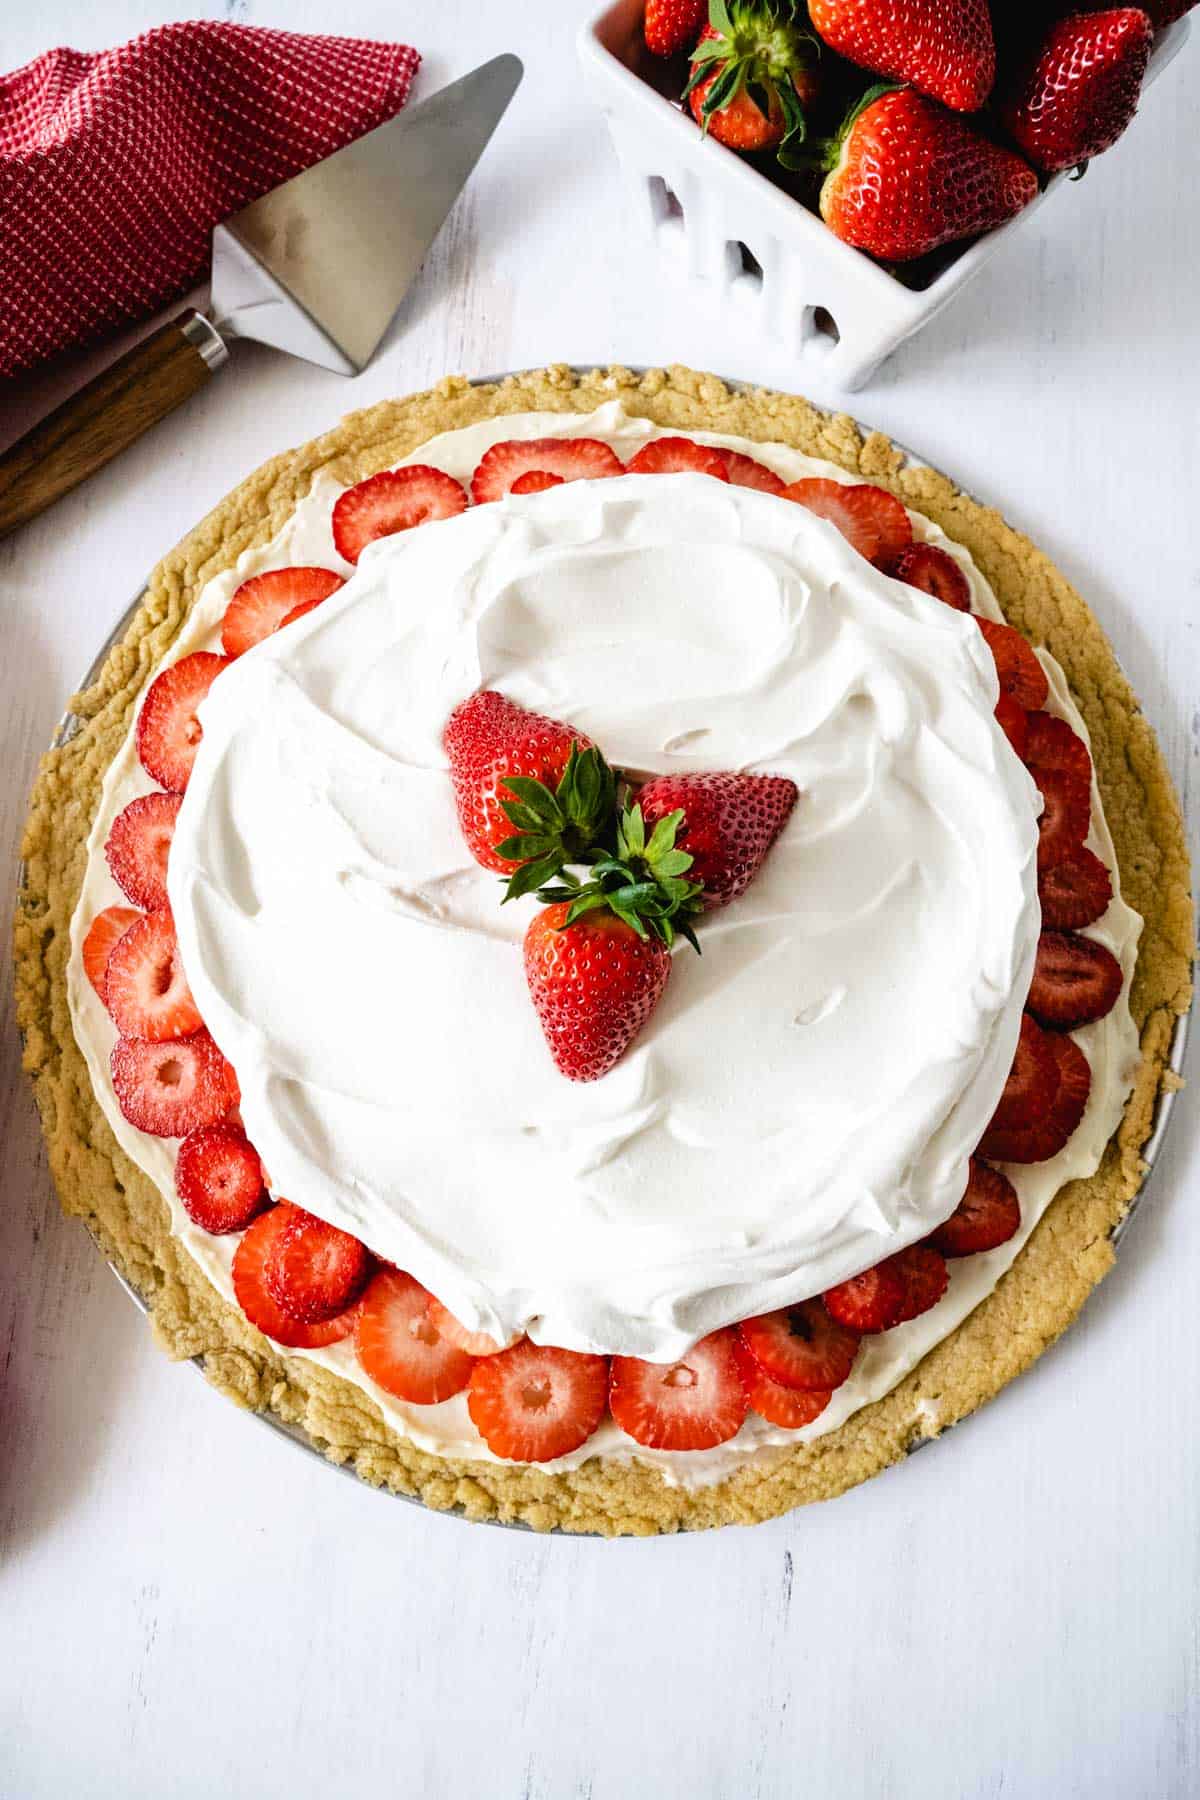 A strawberry pizza with a cookie dough crust, sliced strawberries and topped with whipped cream on a white wooden table with strawberries and a cake slicer in the background.